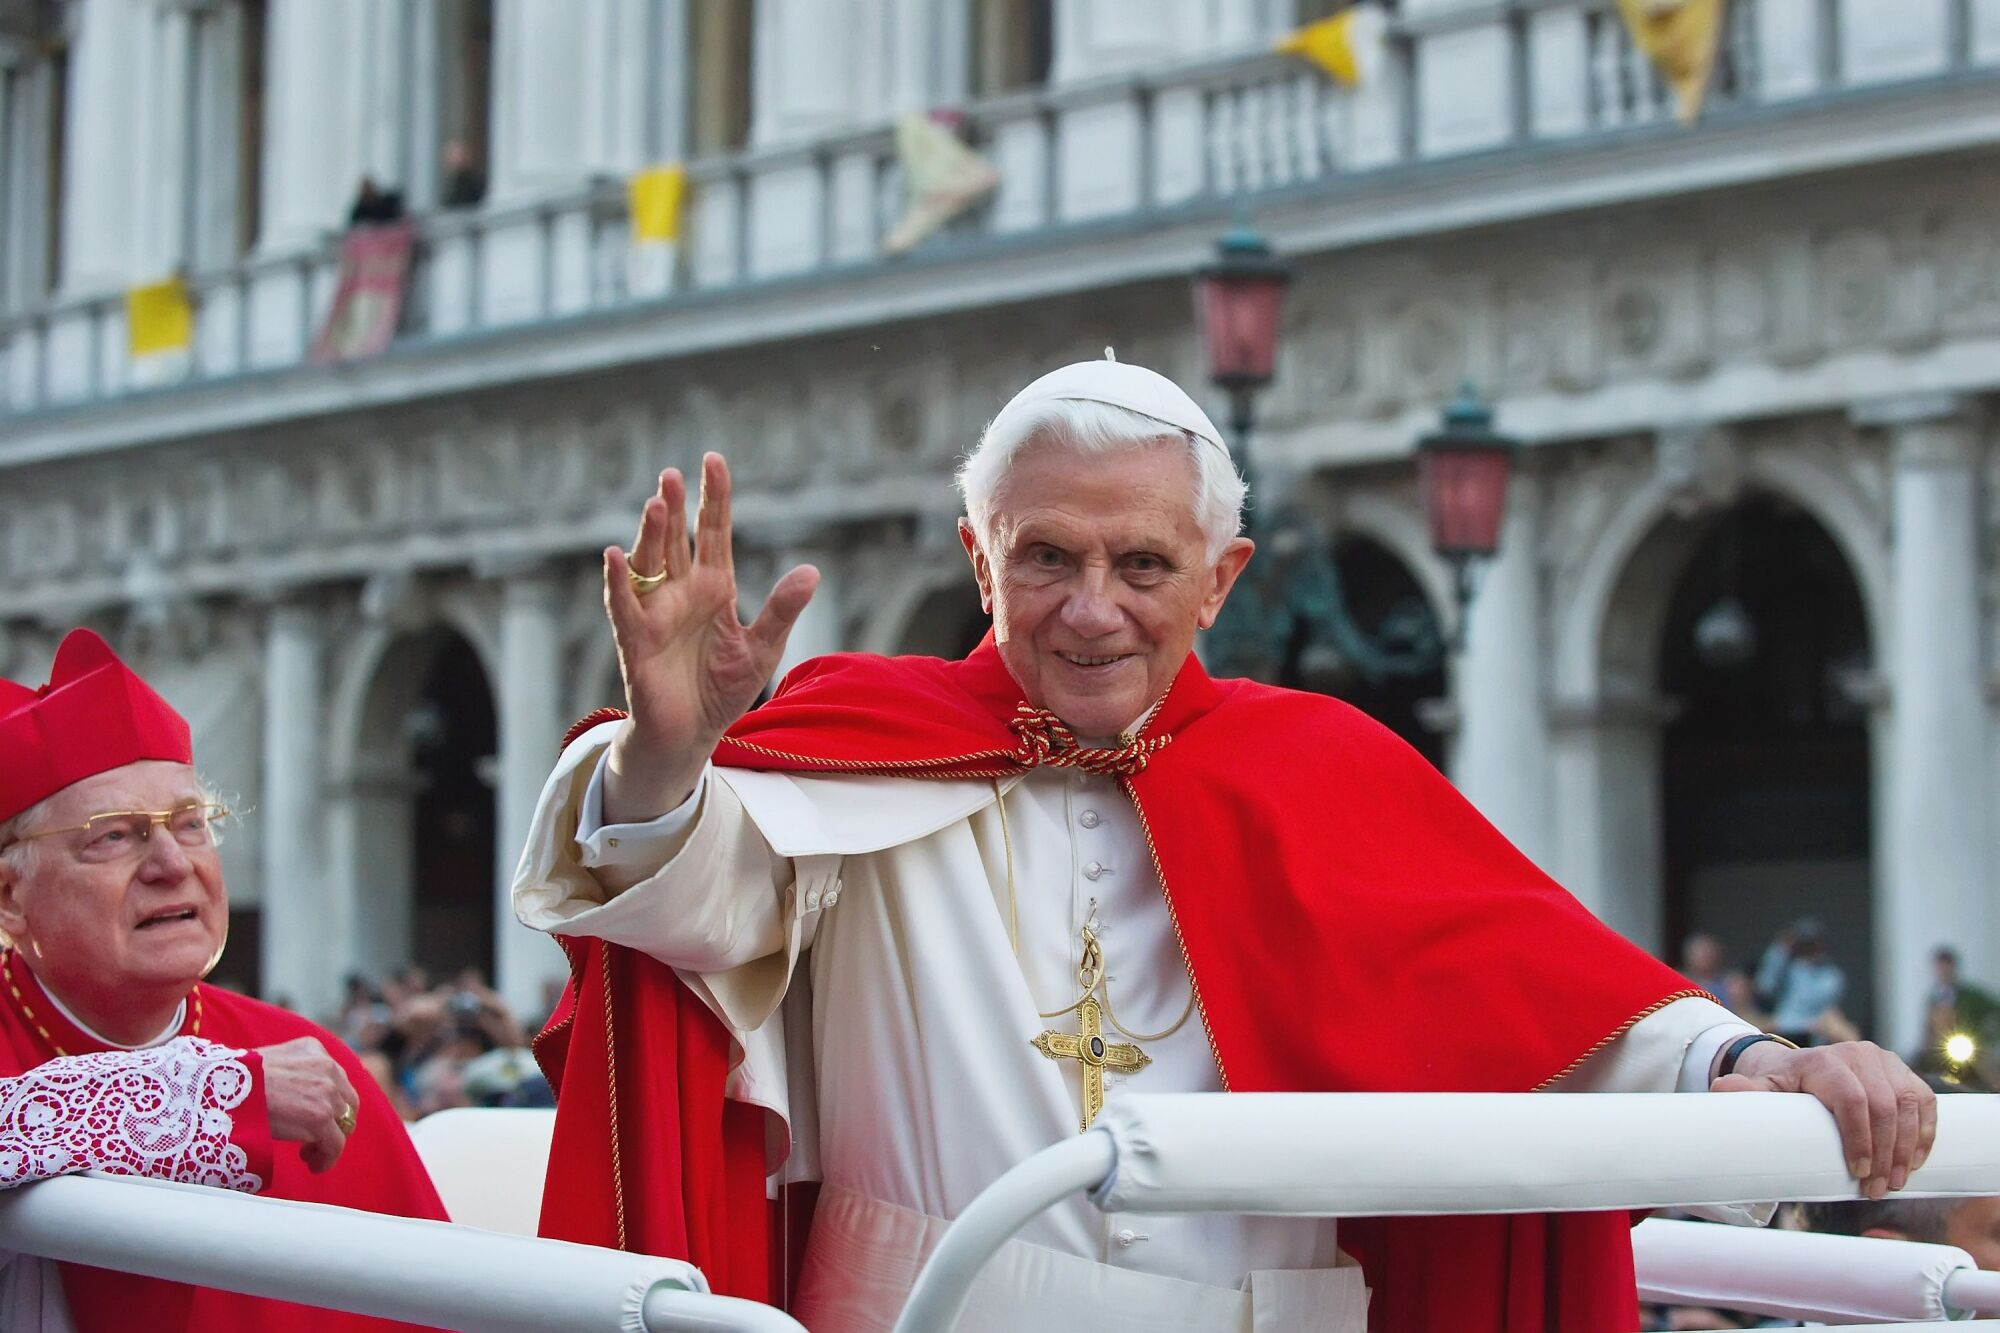 Pope Benedict XVI waves from a vehicle as another passenger looks on as they pass a building.